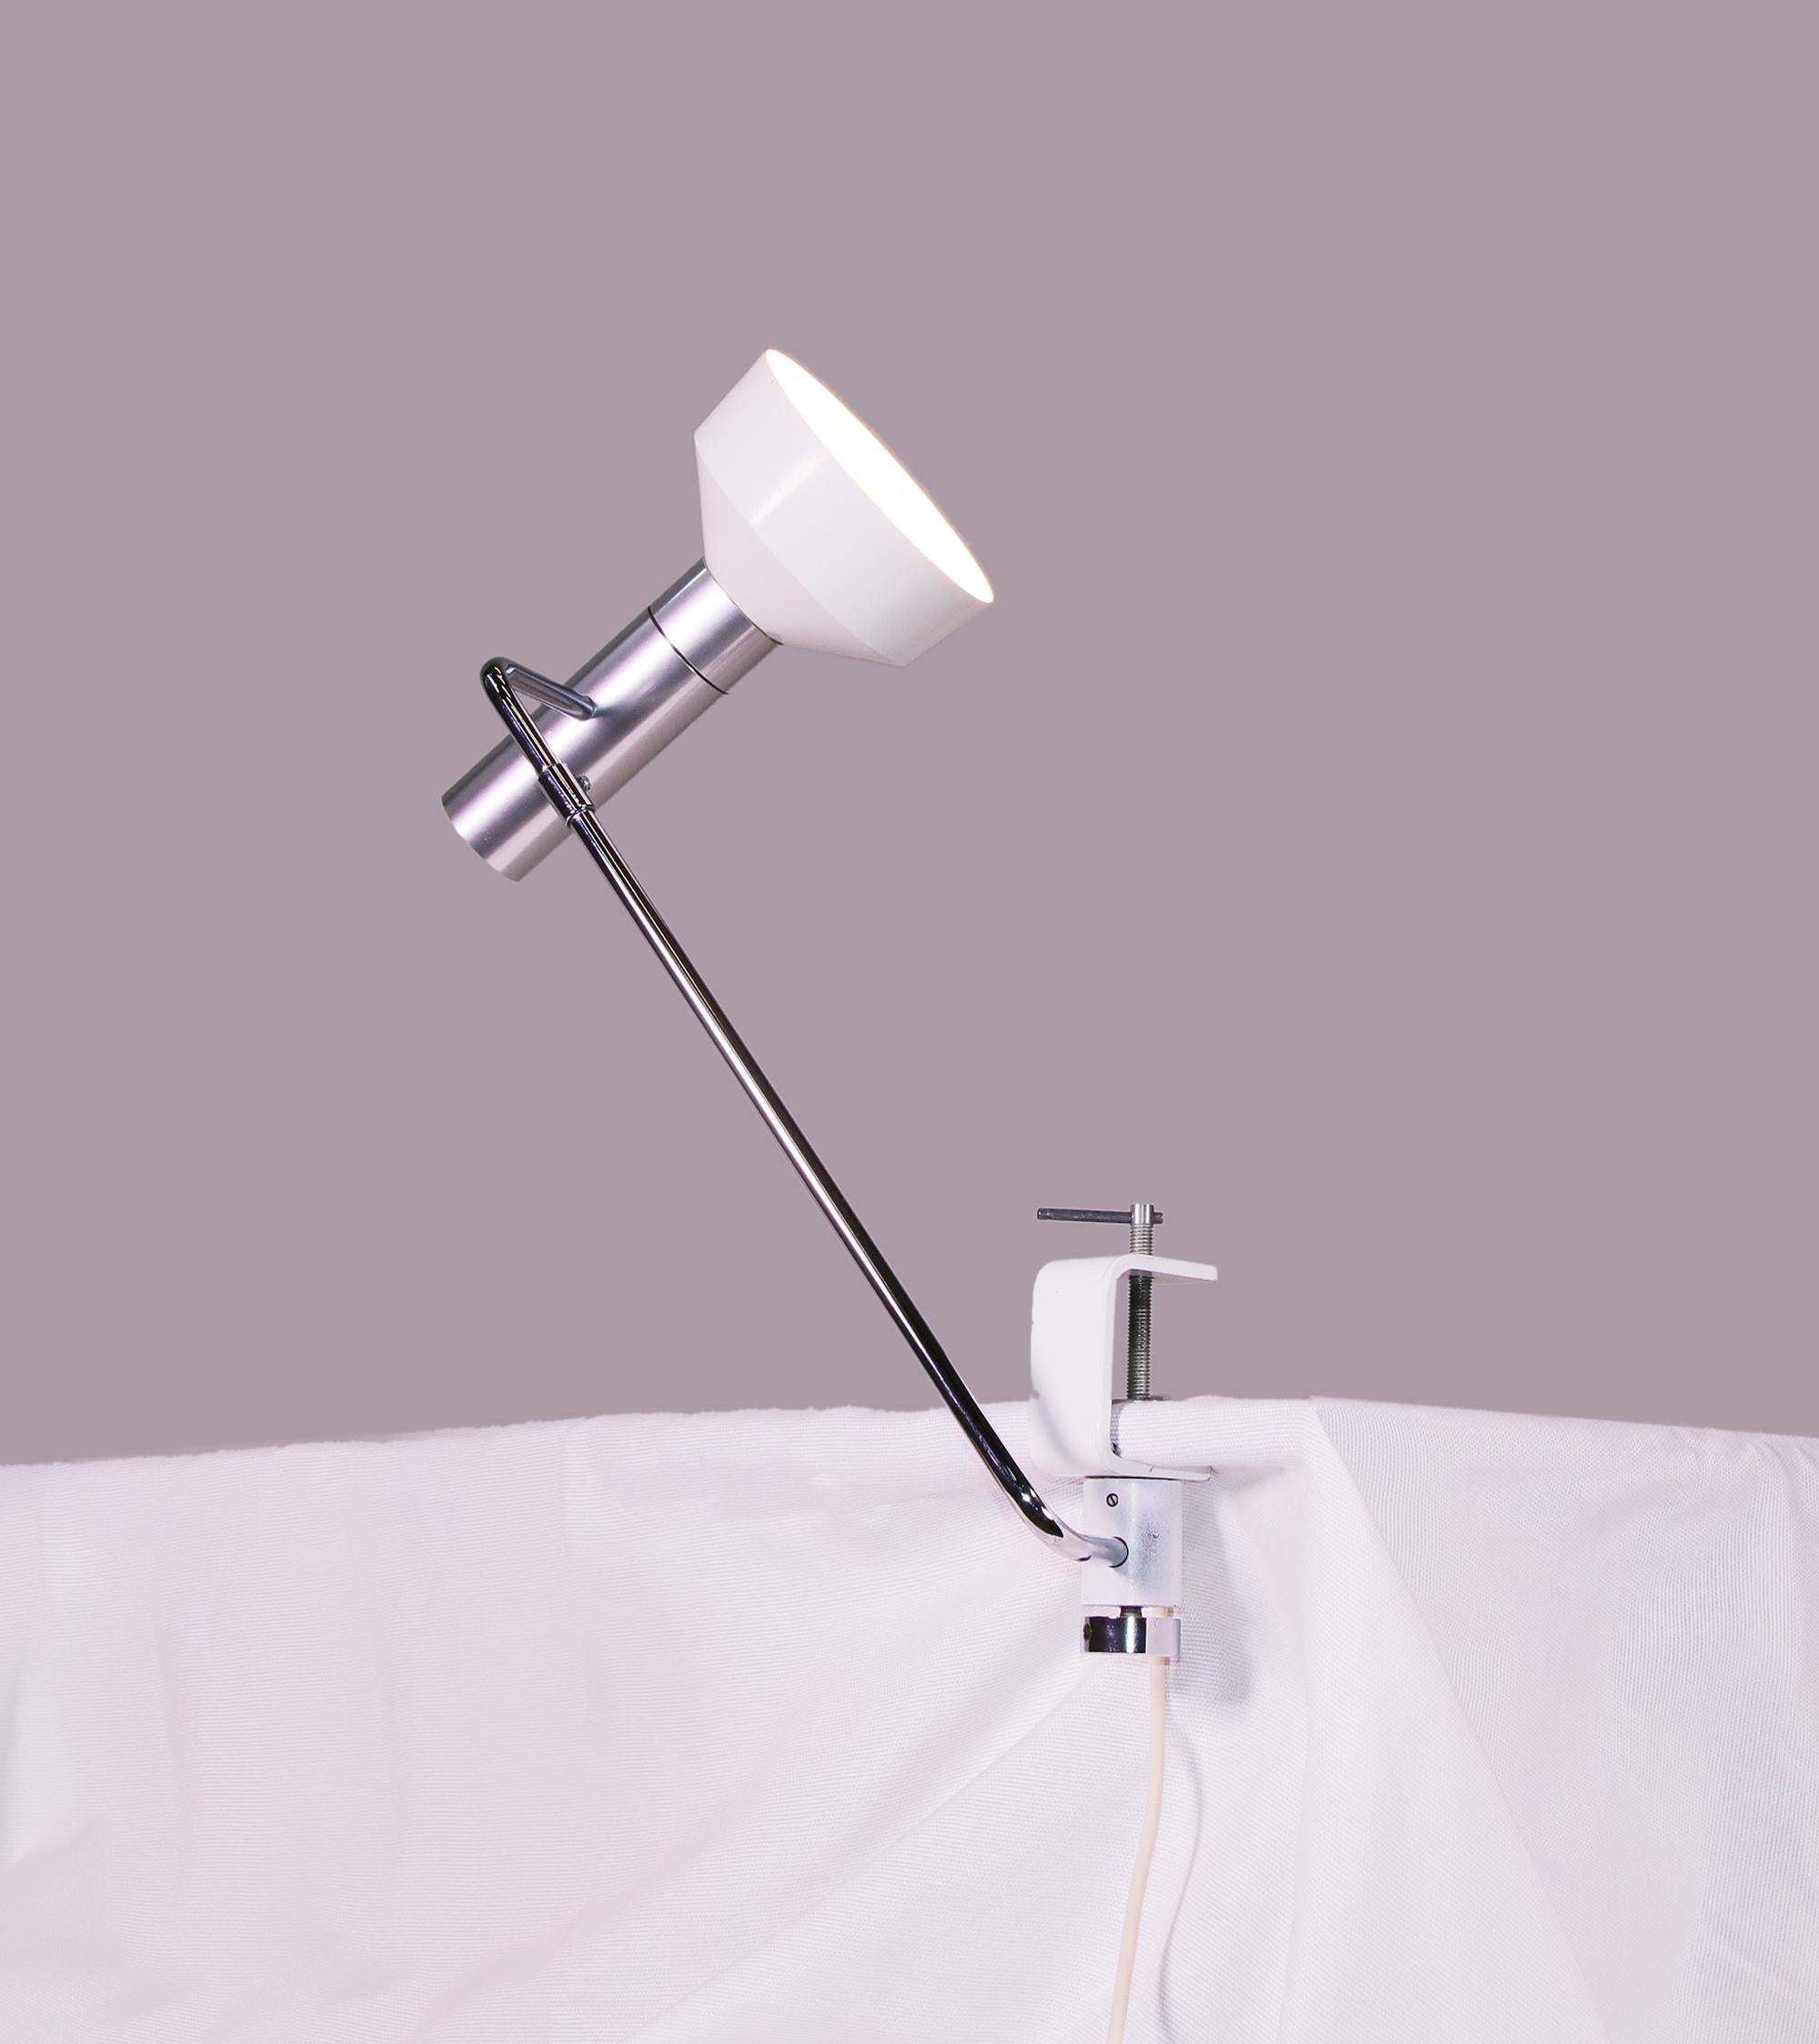 A Minilux clamp lamp designed by Rico & Rosemarie Baltensweiler in the 1950s and manufactured by Baltenweiler, Switzerland. This lamp is made of aluminium and chrome with an adjustable arm and reflector. 

Measures: height: 18“ in. (46 cm), height